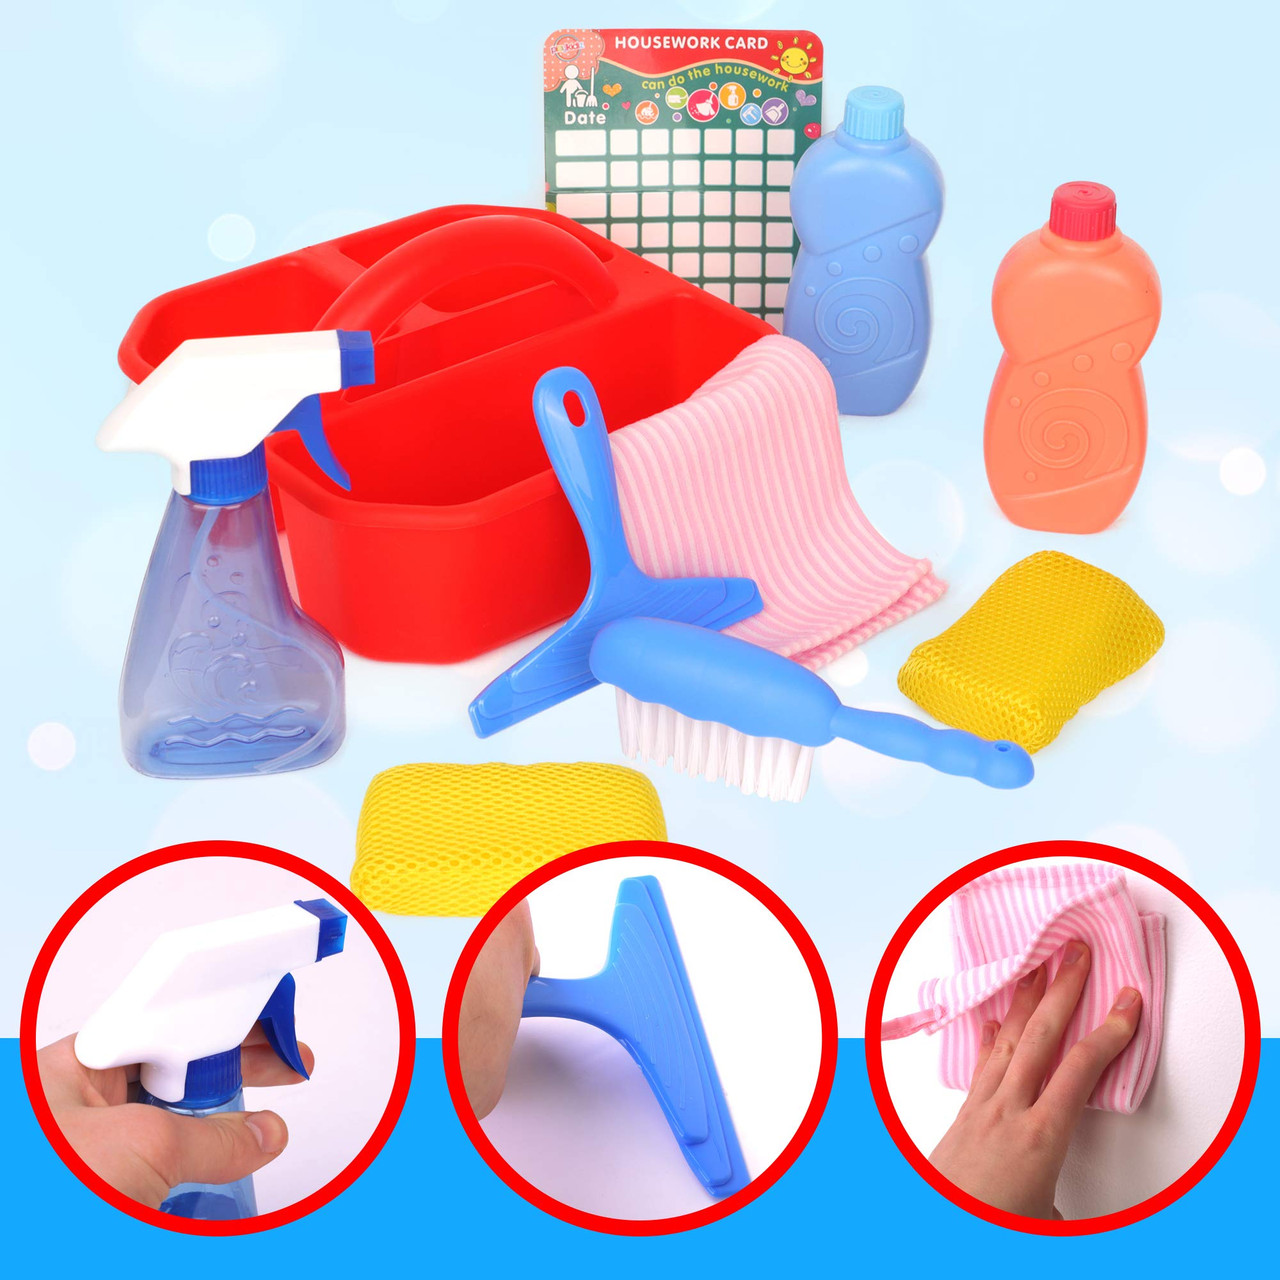 Kids Cleaning Set for Housekeeping Educational Baby Cleaning Toys with  Cleaning Brush Spray Bottle Rag Kid